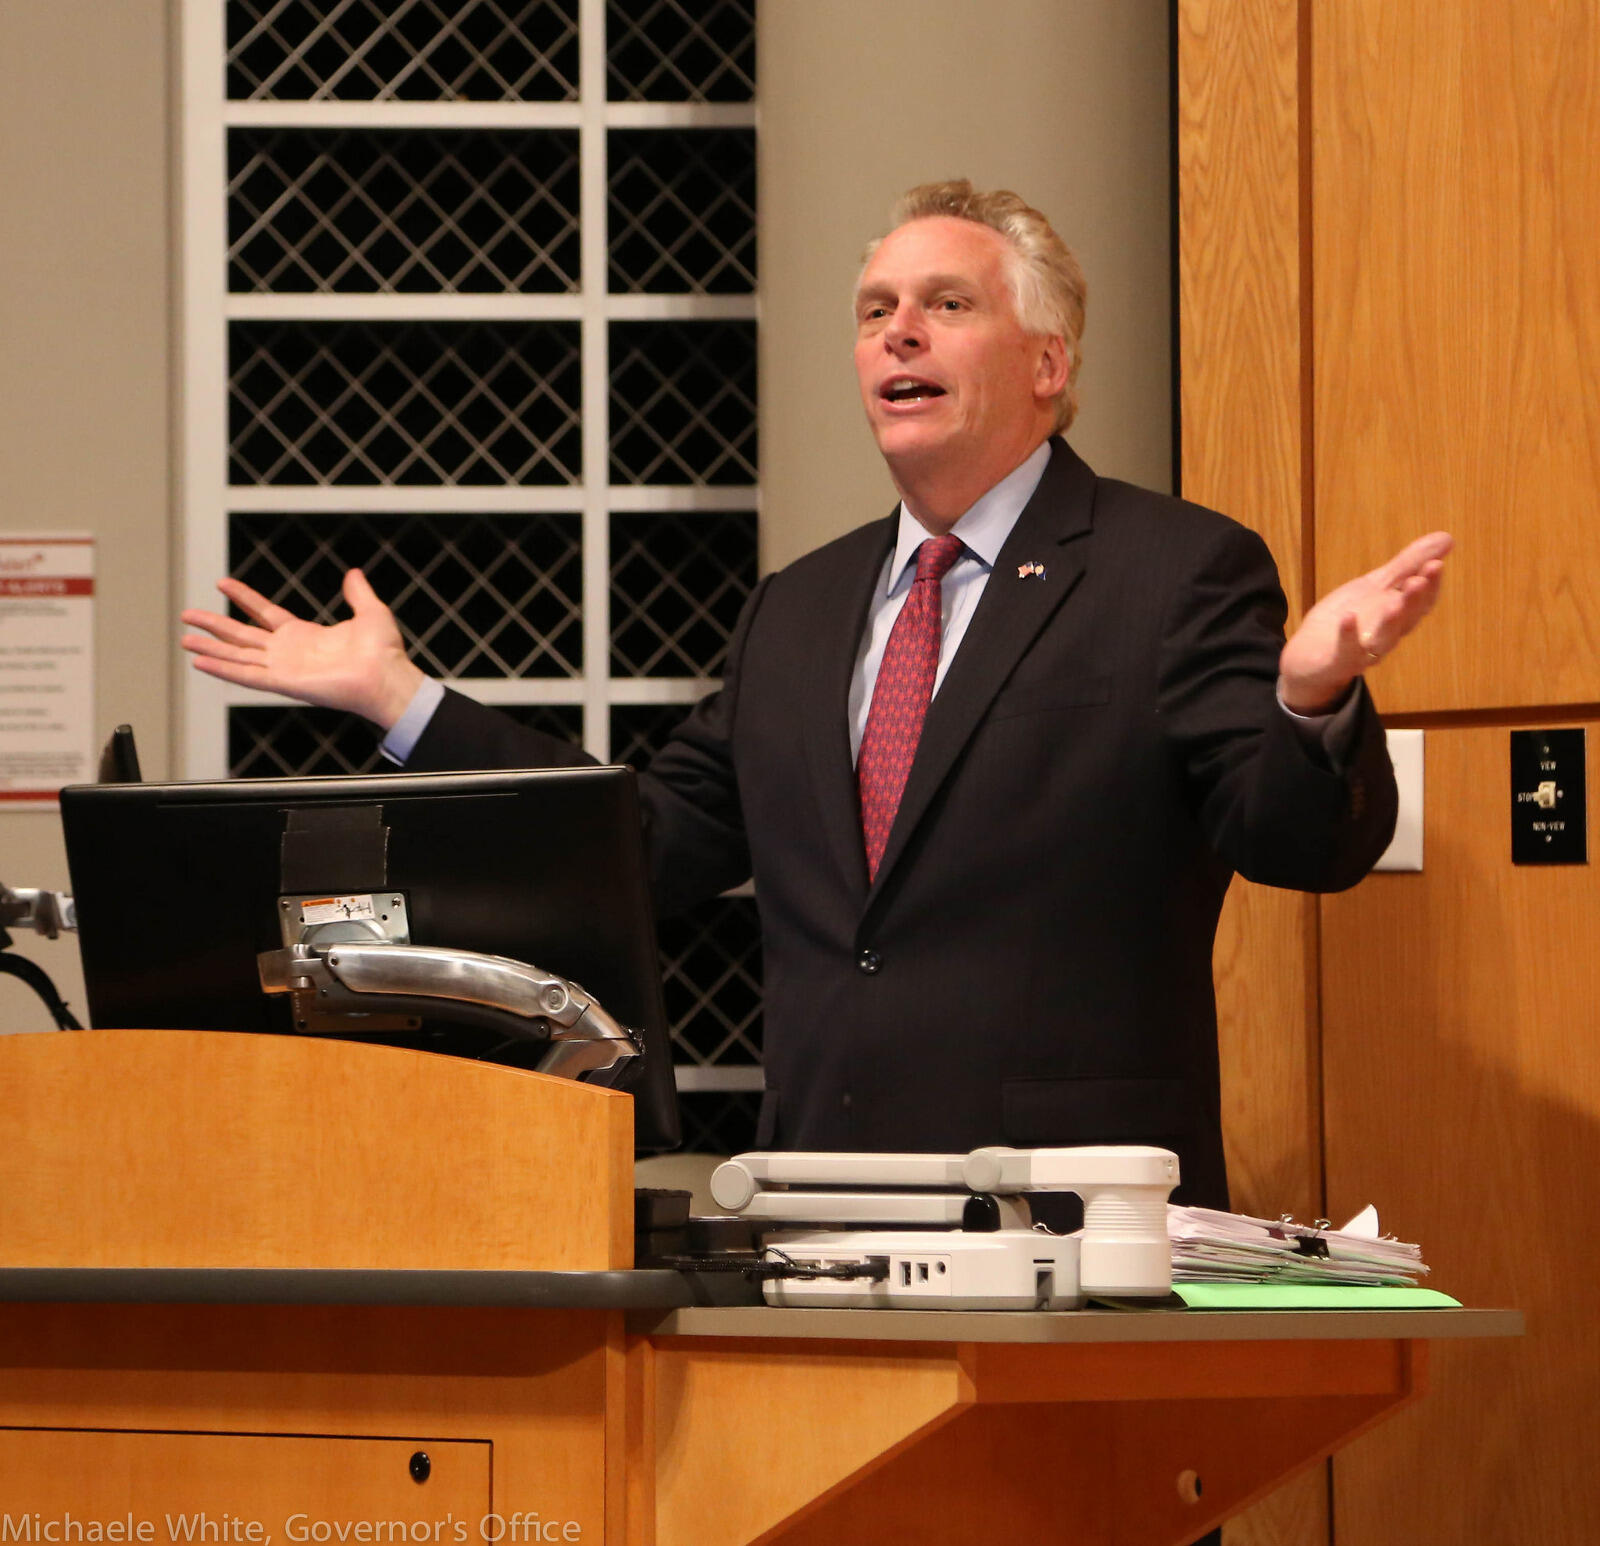 Gov. Terry McAuliffe speaks during the graduation ceremony held by ASK Pediatric Hematology and Oncology Clinic at the Children’s Hospital of Richmond at Virginia Commonwealth University, VCU Health and the ASK Childhood Cancer Foundation. Photos by Michaele White, Governor's Office

